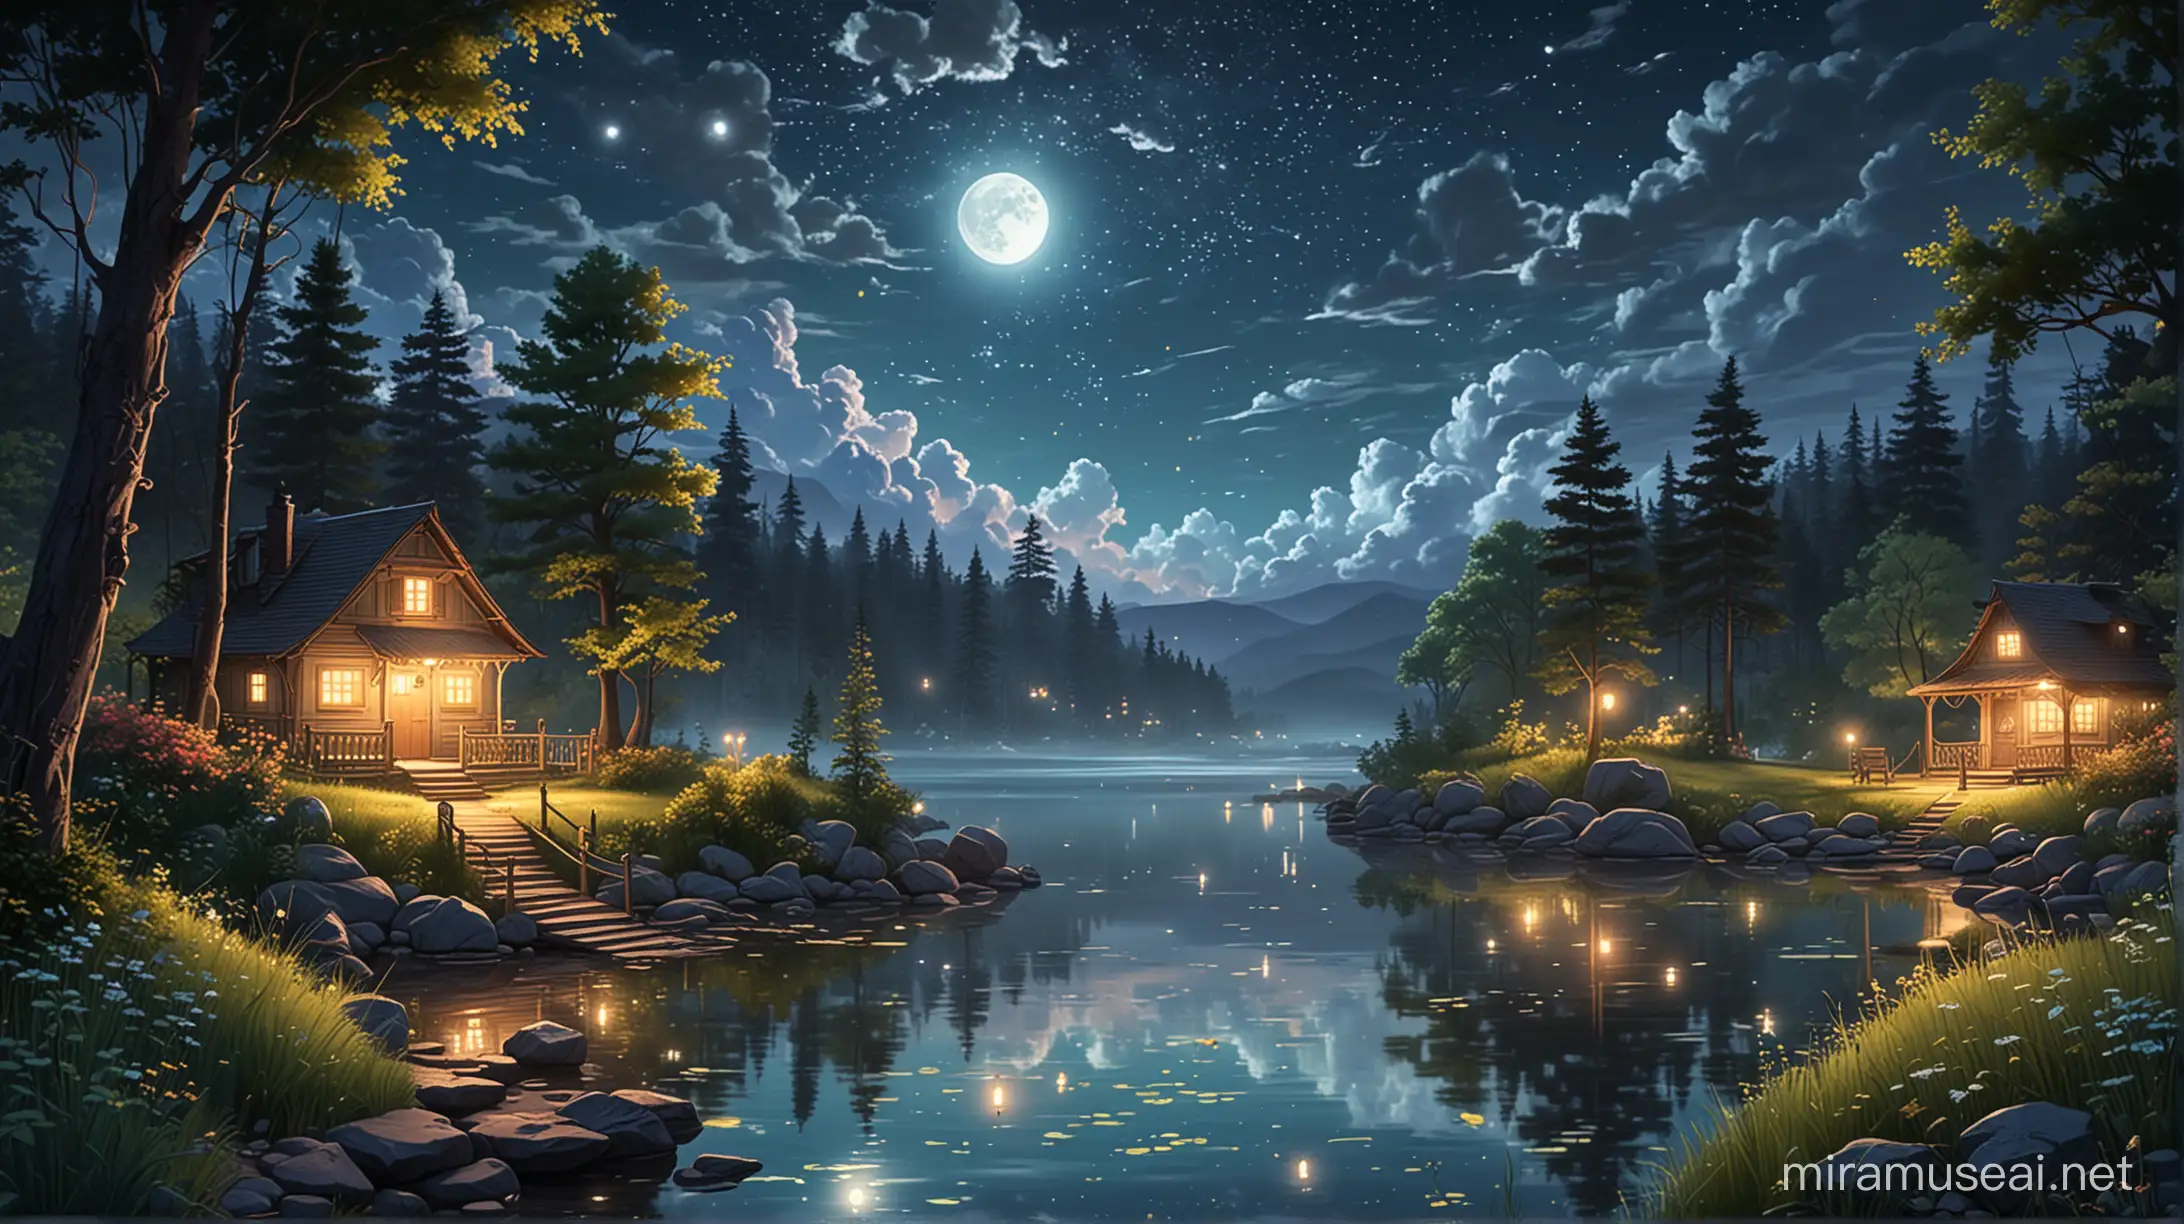 Enchanting Summer Night Cartoon Landscape with Moon and Fireflies